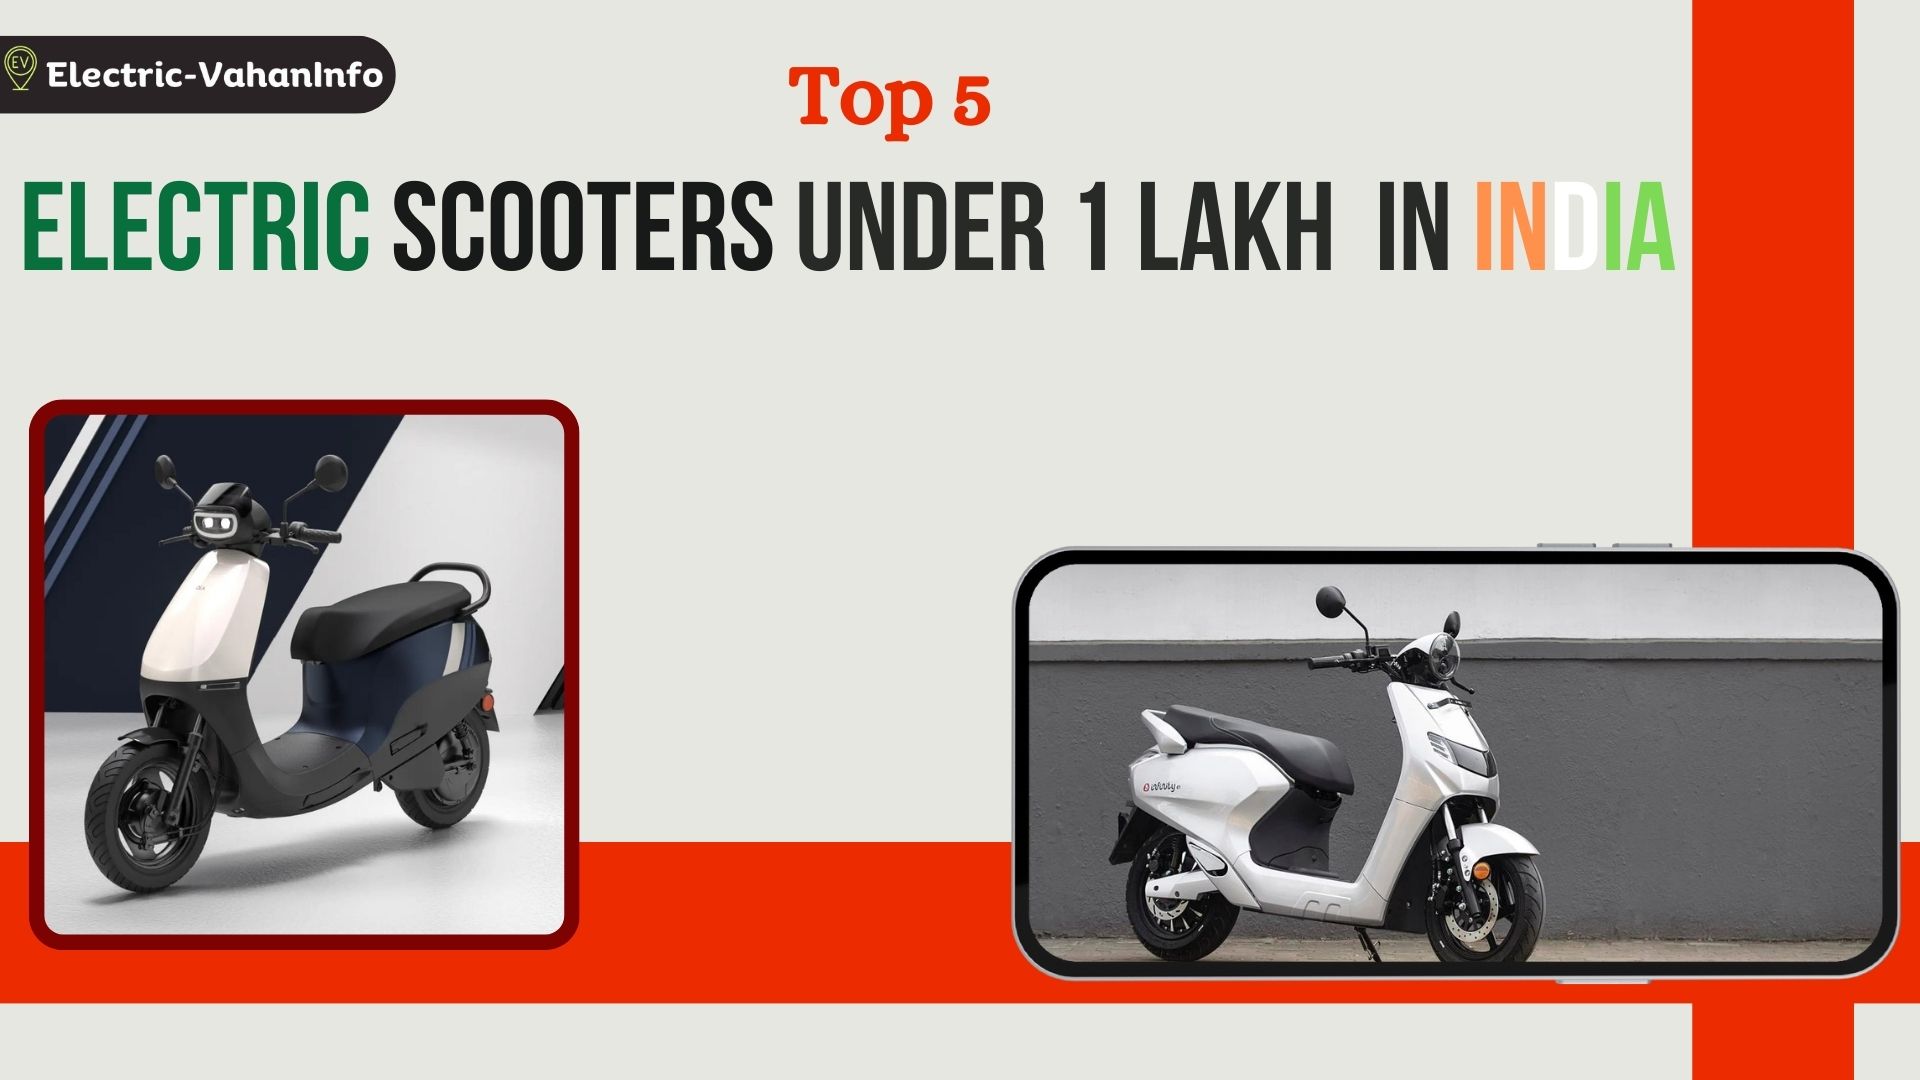 https://electric-vahaninfo.com/top-5-electric-scooters-under-1-lakh-in-india/